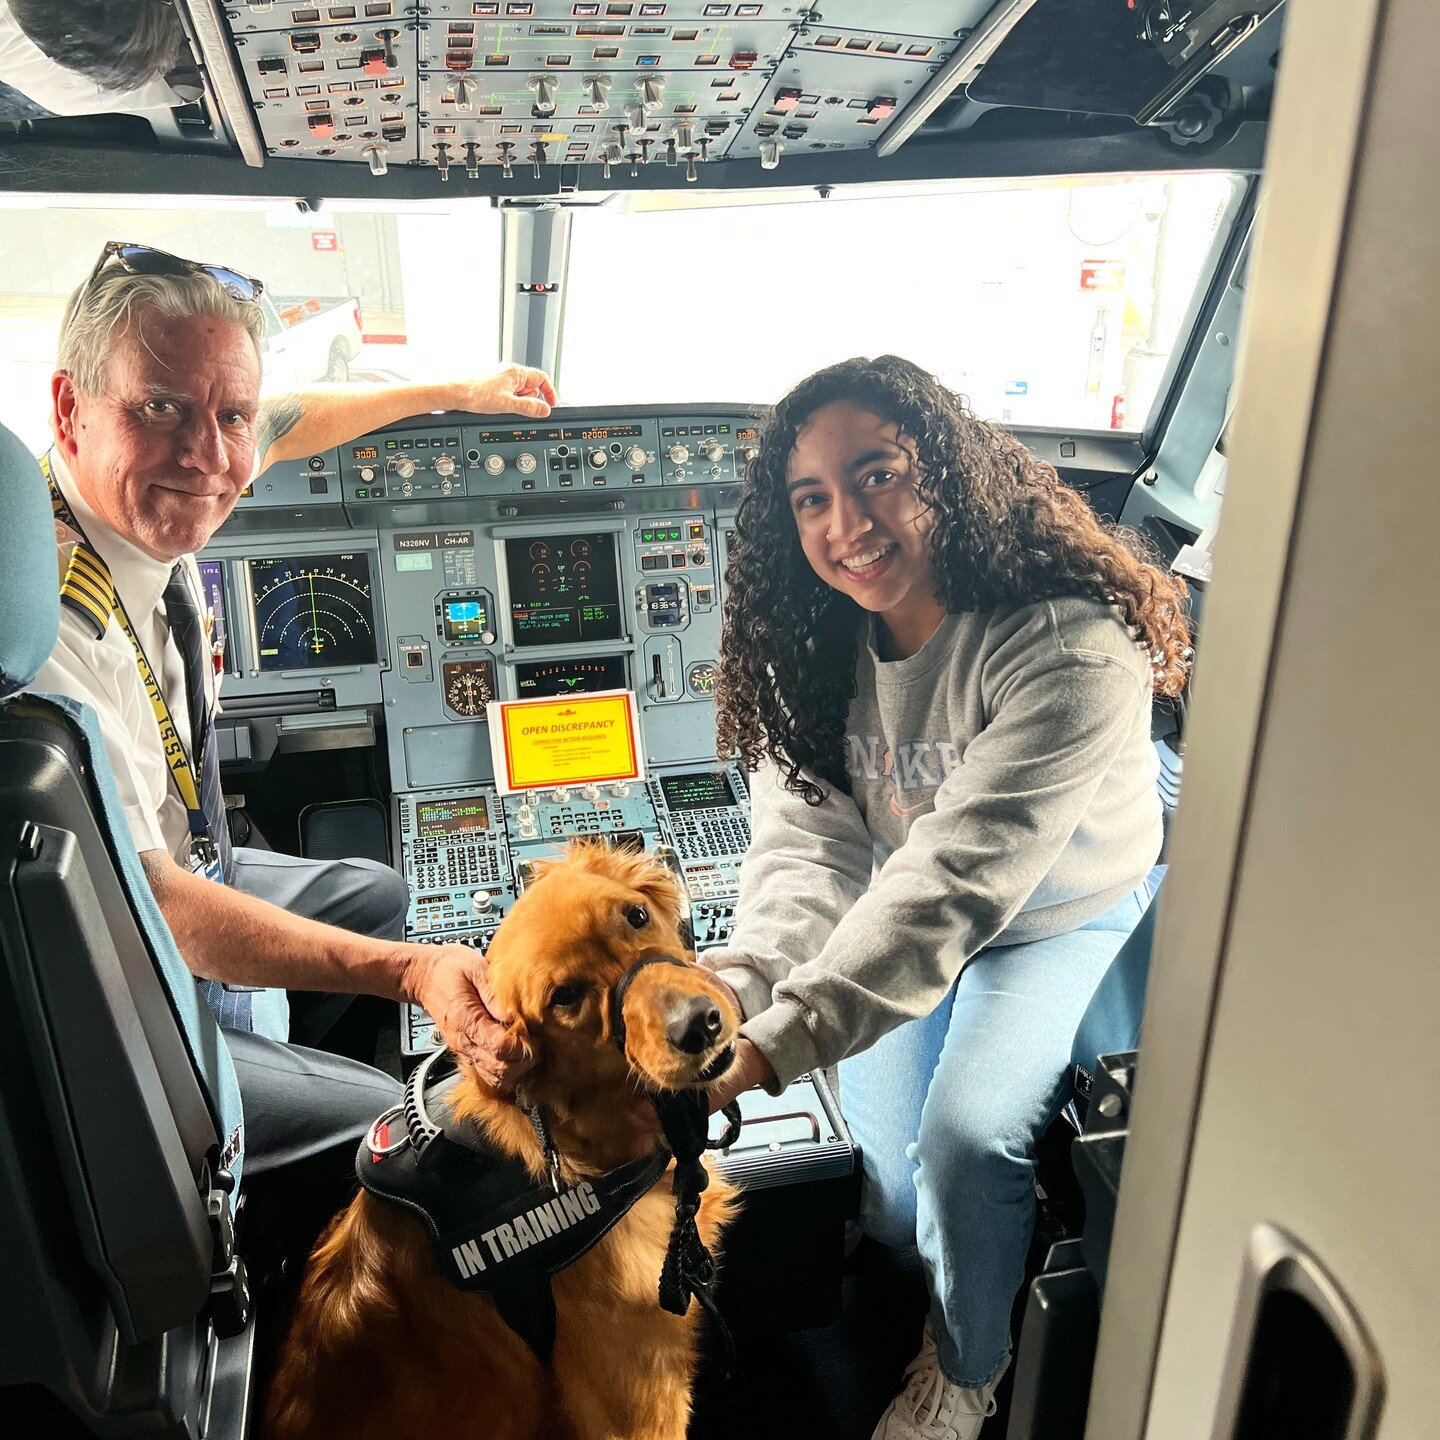 Our furry friend Fiji on his first flight with Captain Leo. Thank you Anayaset Sandino for visiting the flight deck! 🐕

#airbus #airbusa320 #airbuscaptain #airline #airlinepilot #airplane #commercialpilot #flying #aviation #pilot #dogsofinstagram #d